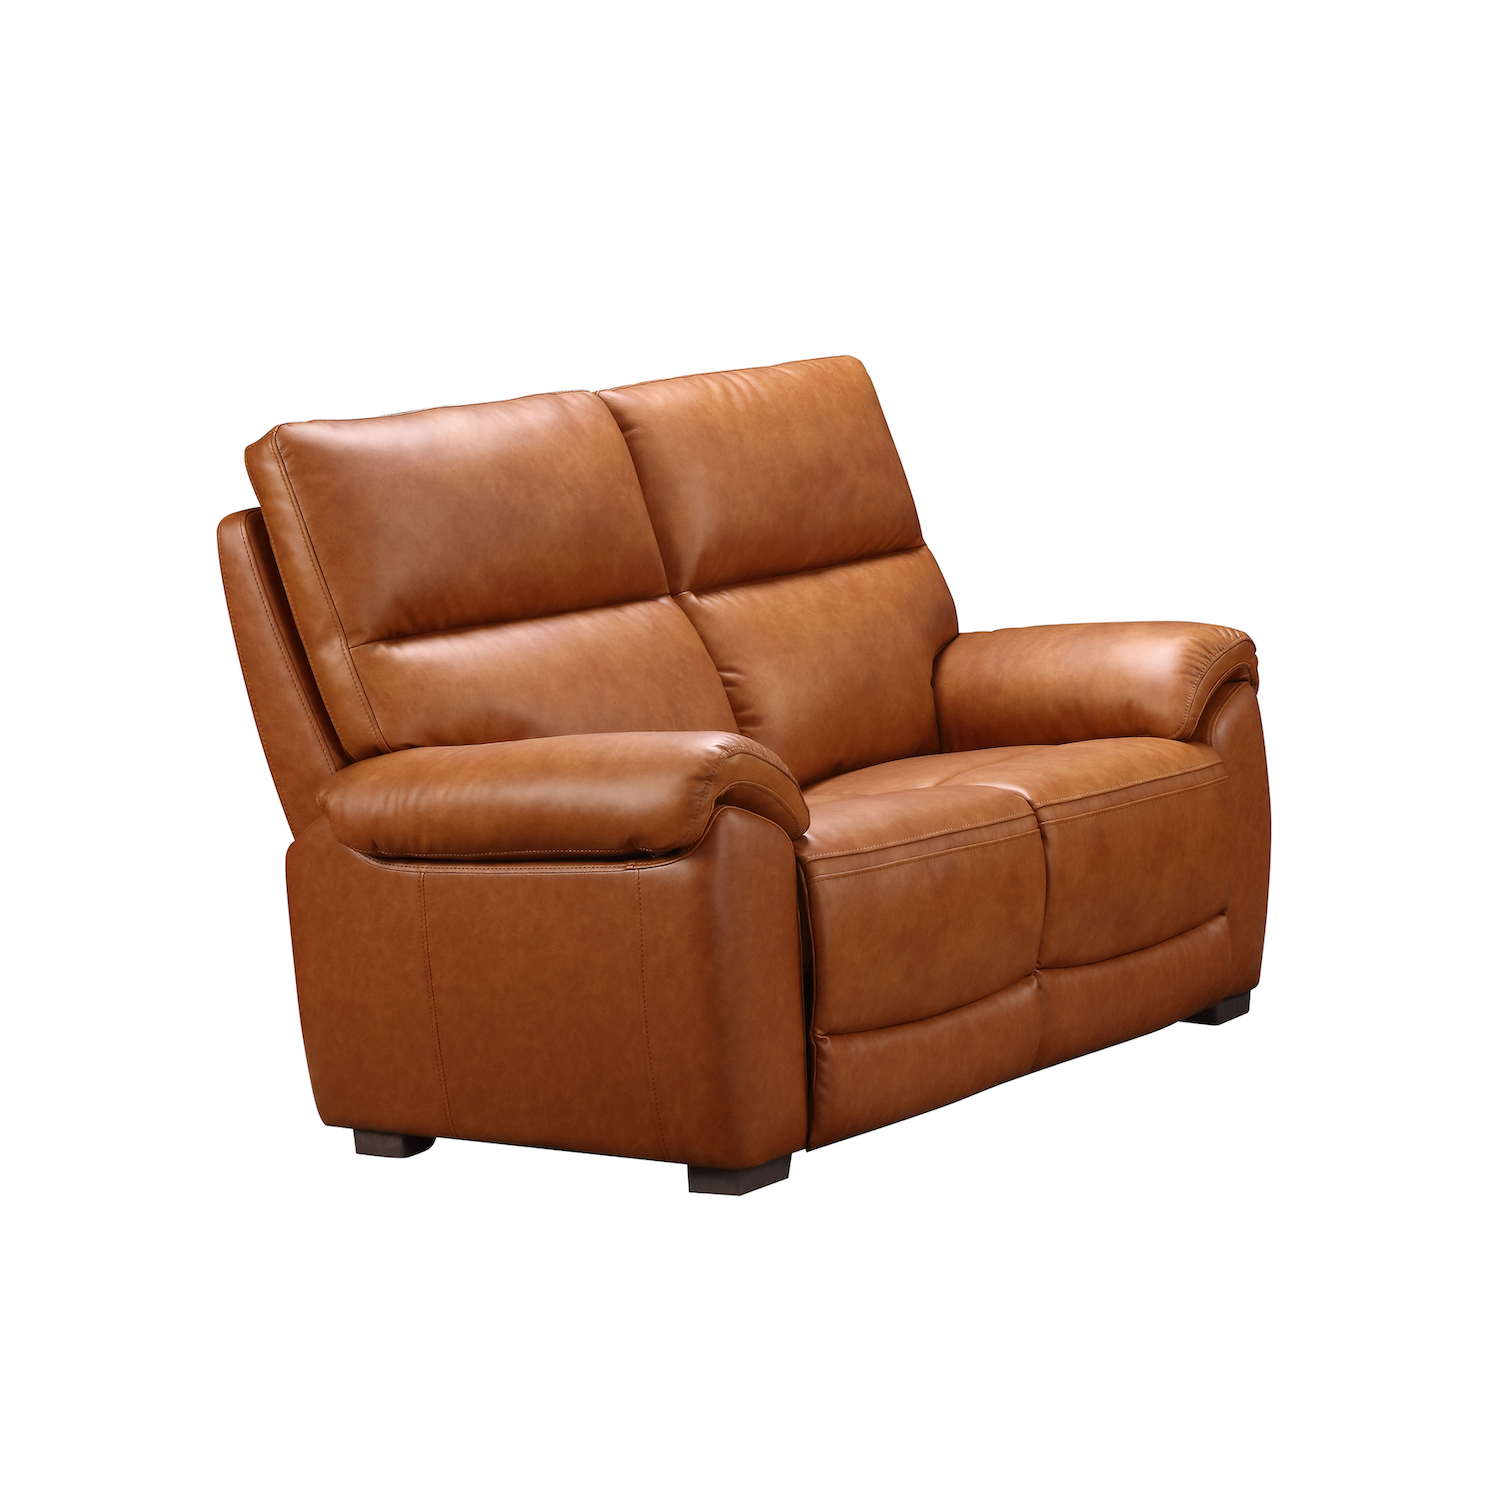 Rocco 2 Seater Power Recliner Sofa Tan Leather